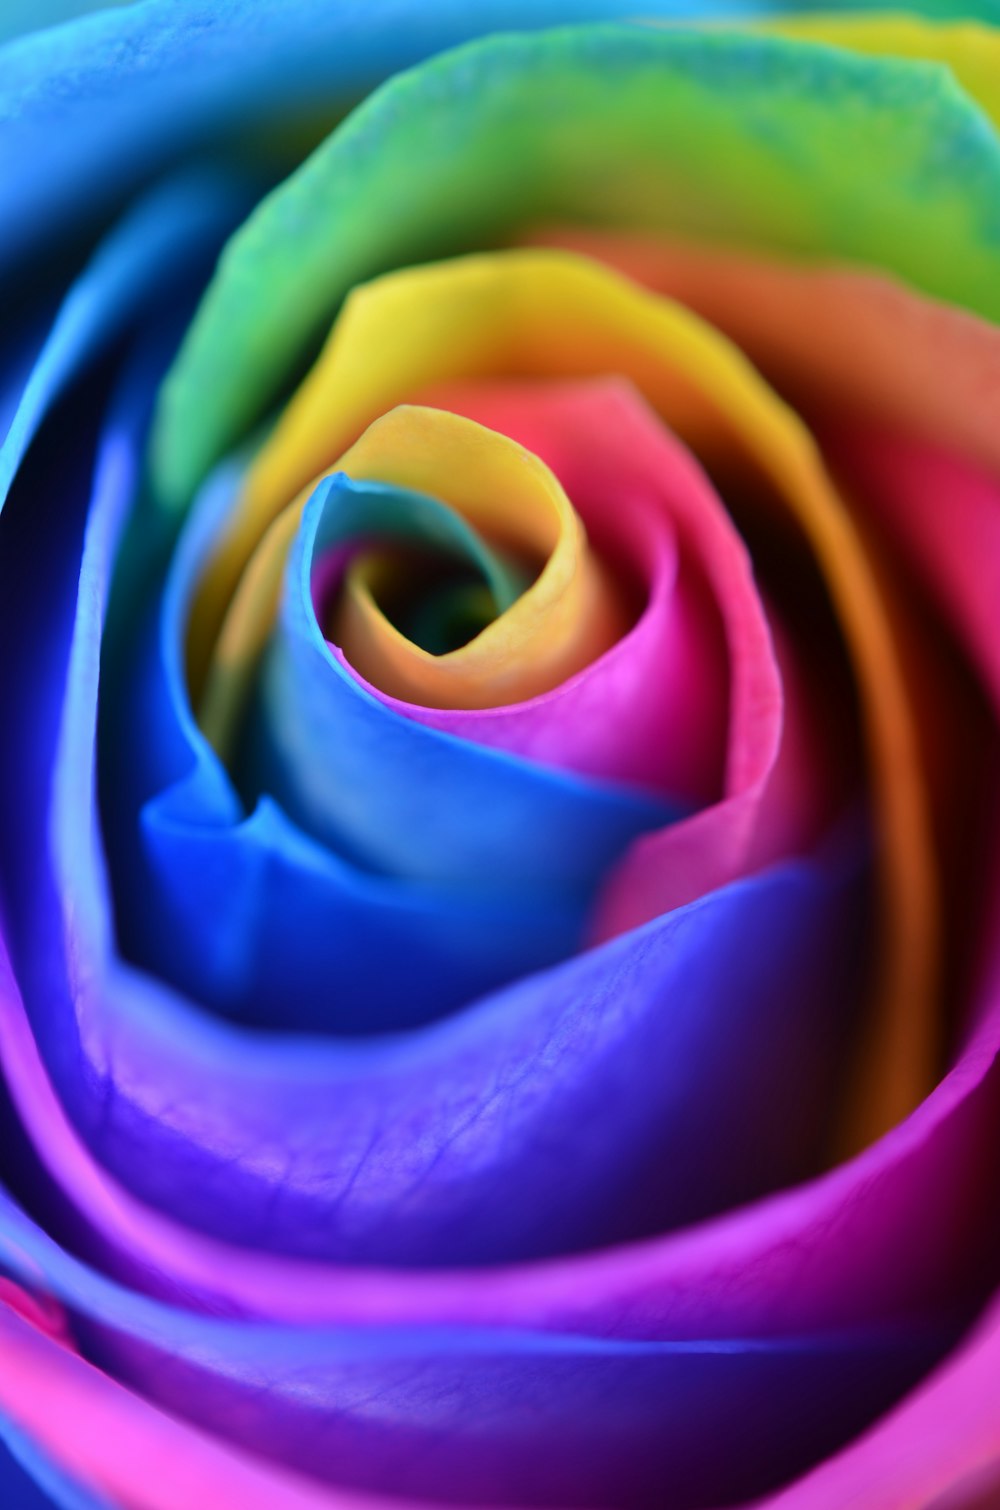 1K+ Rainbow Rose Pictures | Download Free Images on Unsplash